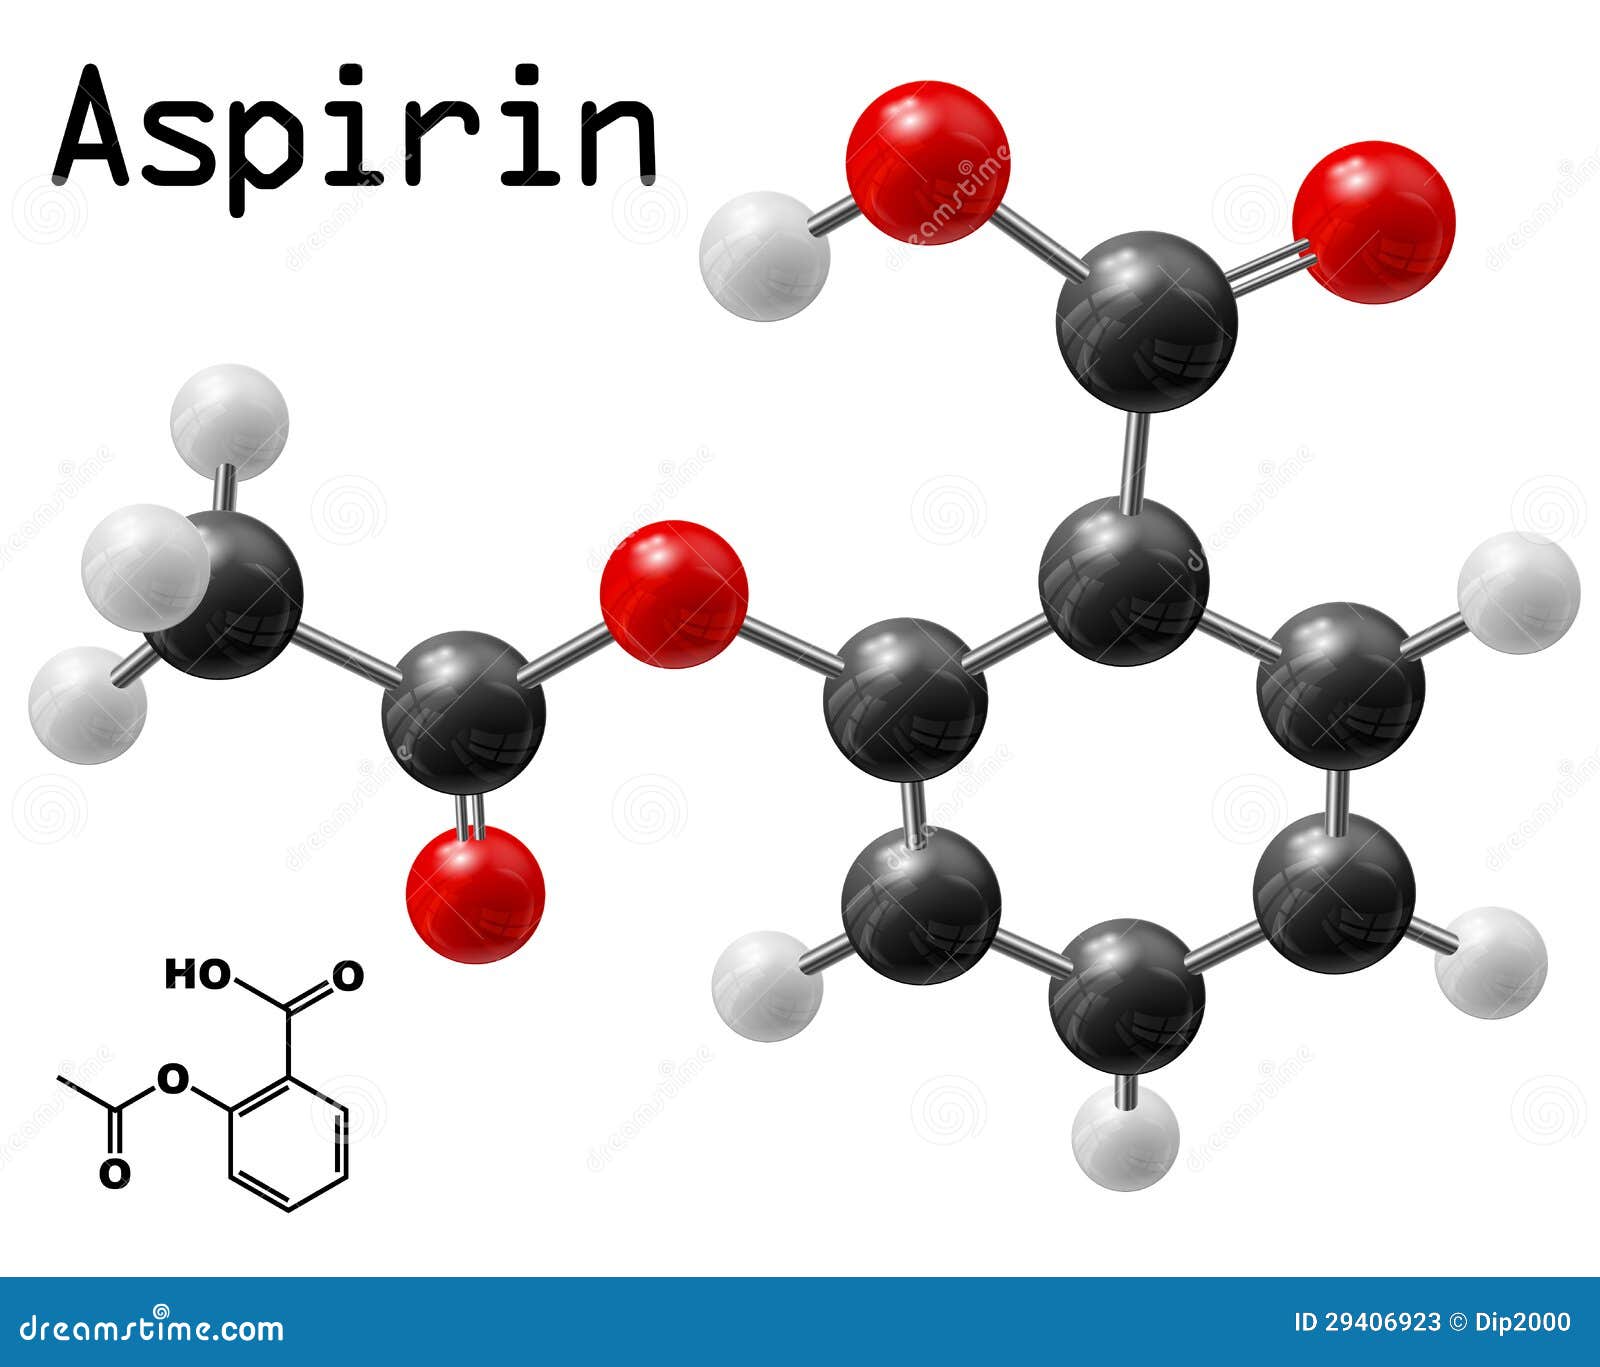 List 91+ Images how many different elements are in the compound for aspirin Superb